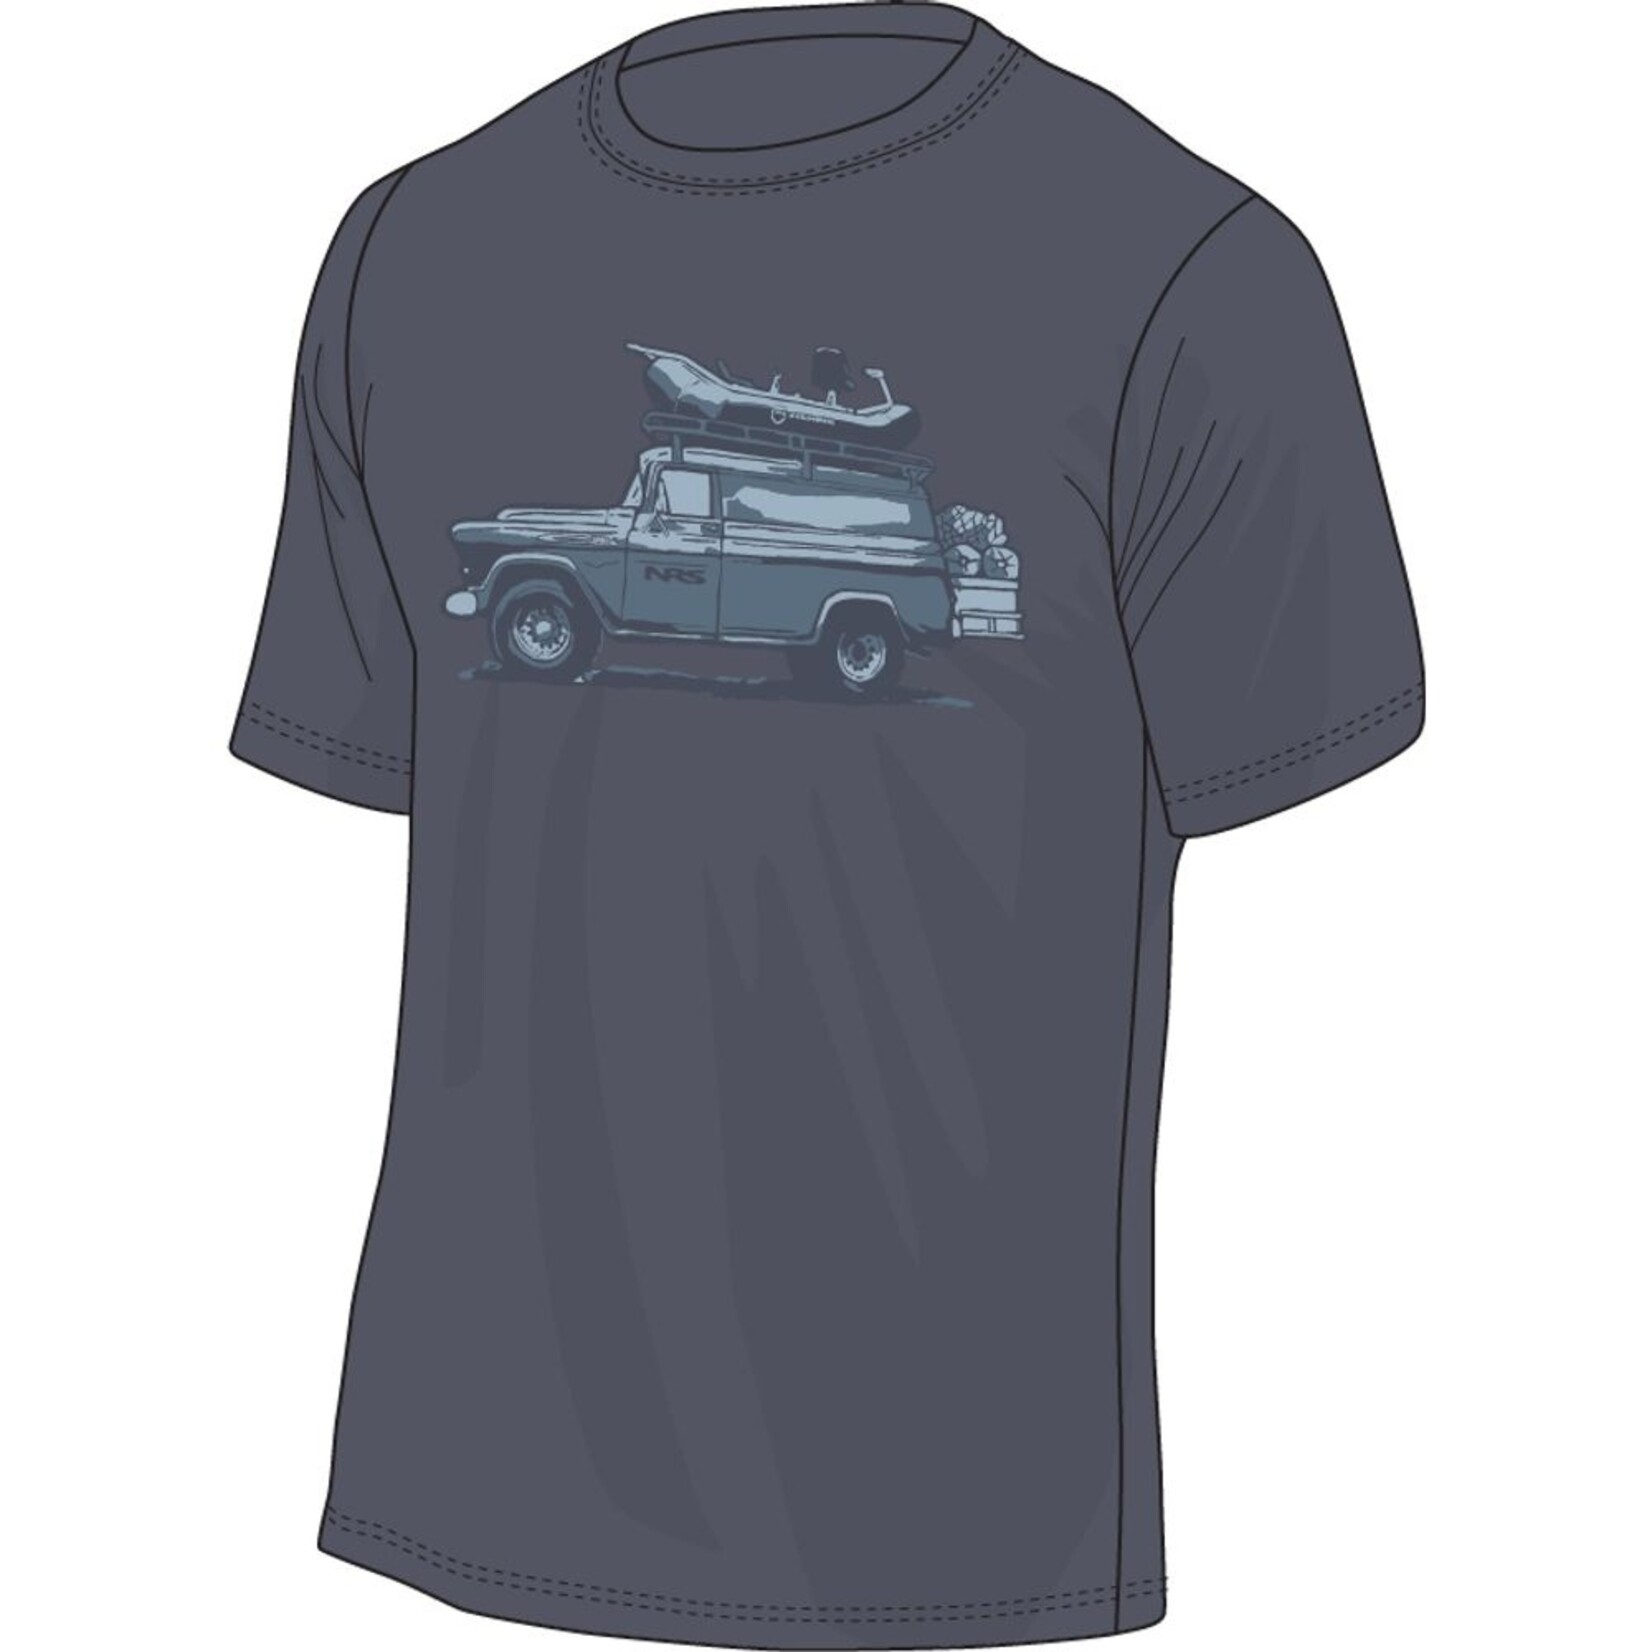 NRS, Inc NRS Men's Rigged Out T-Shirt